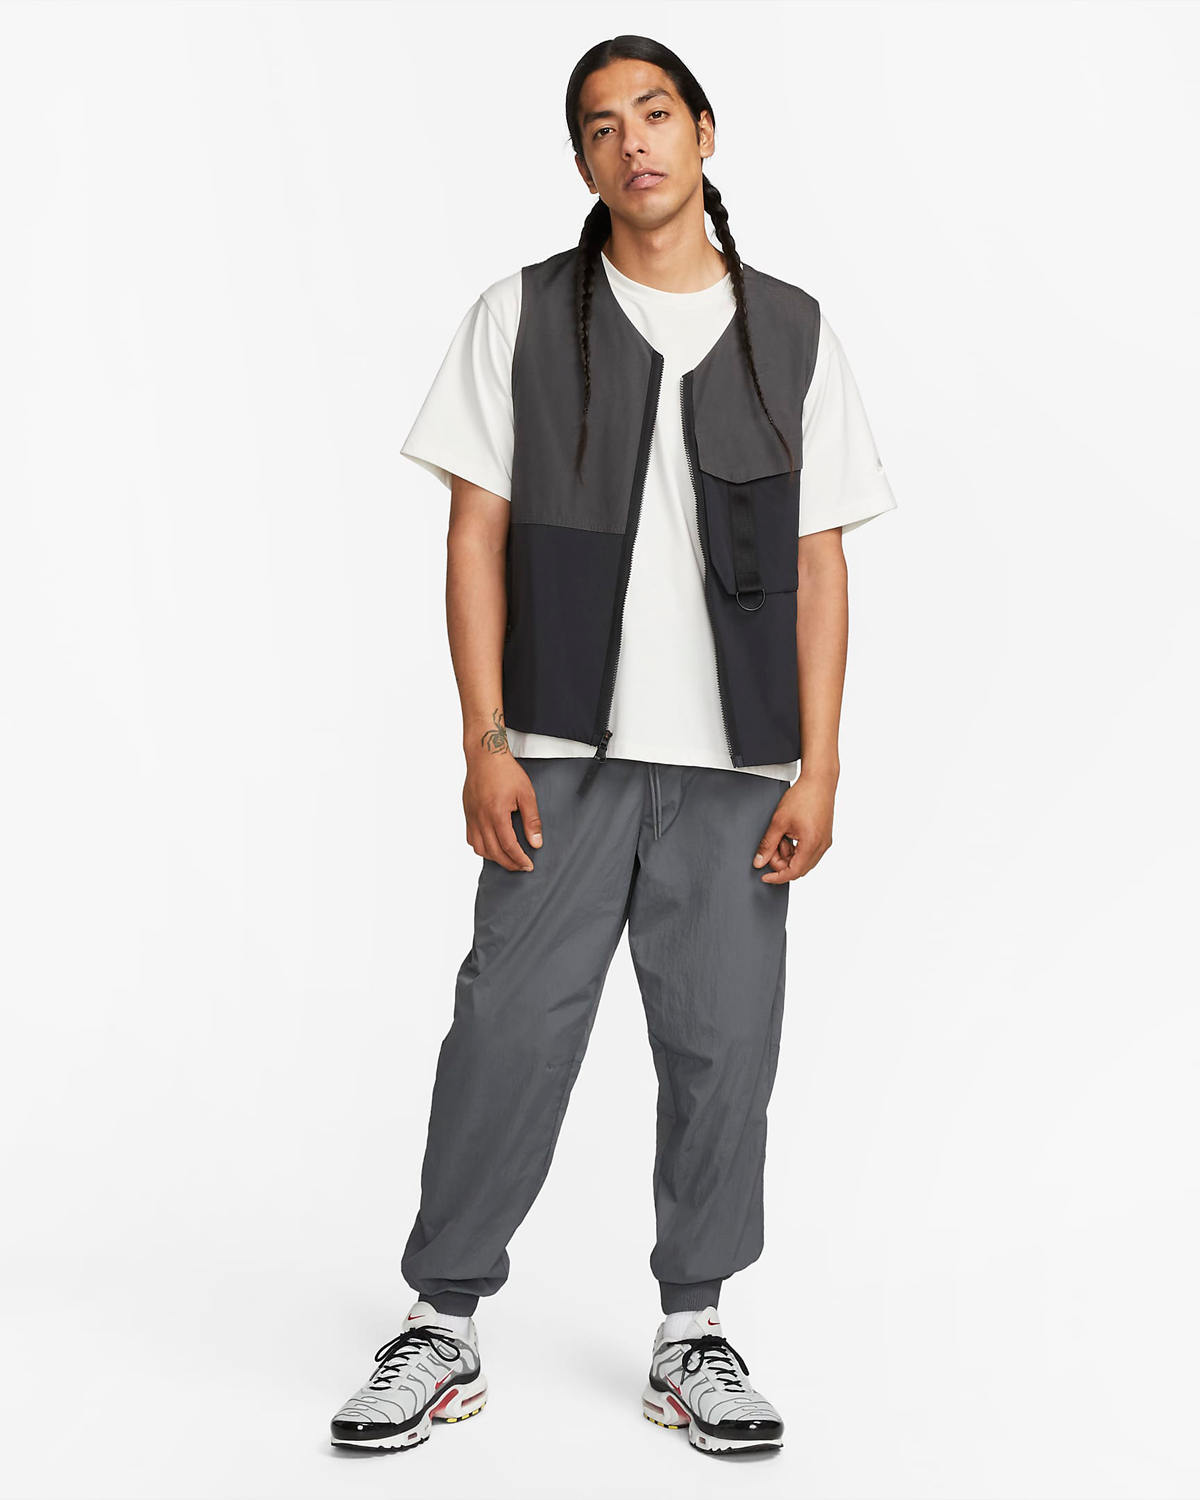 Nike-Sportswear-Tech-Pack-Repel-Woven-Pants-Outfit